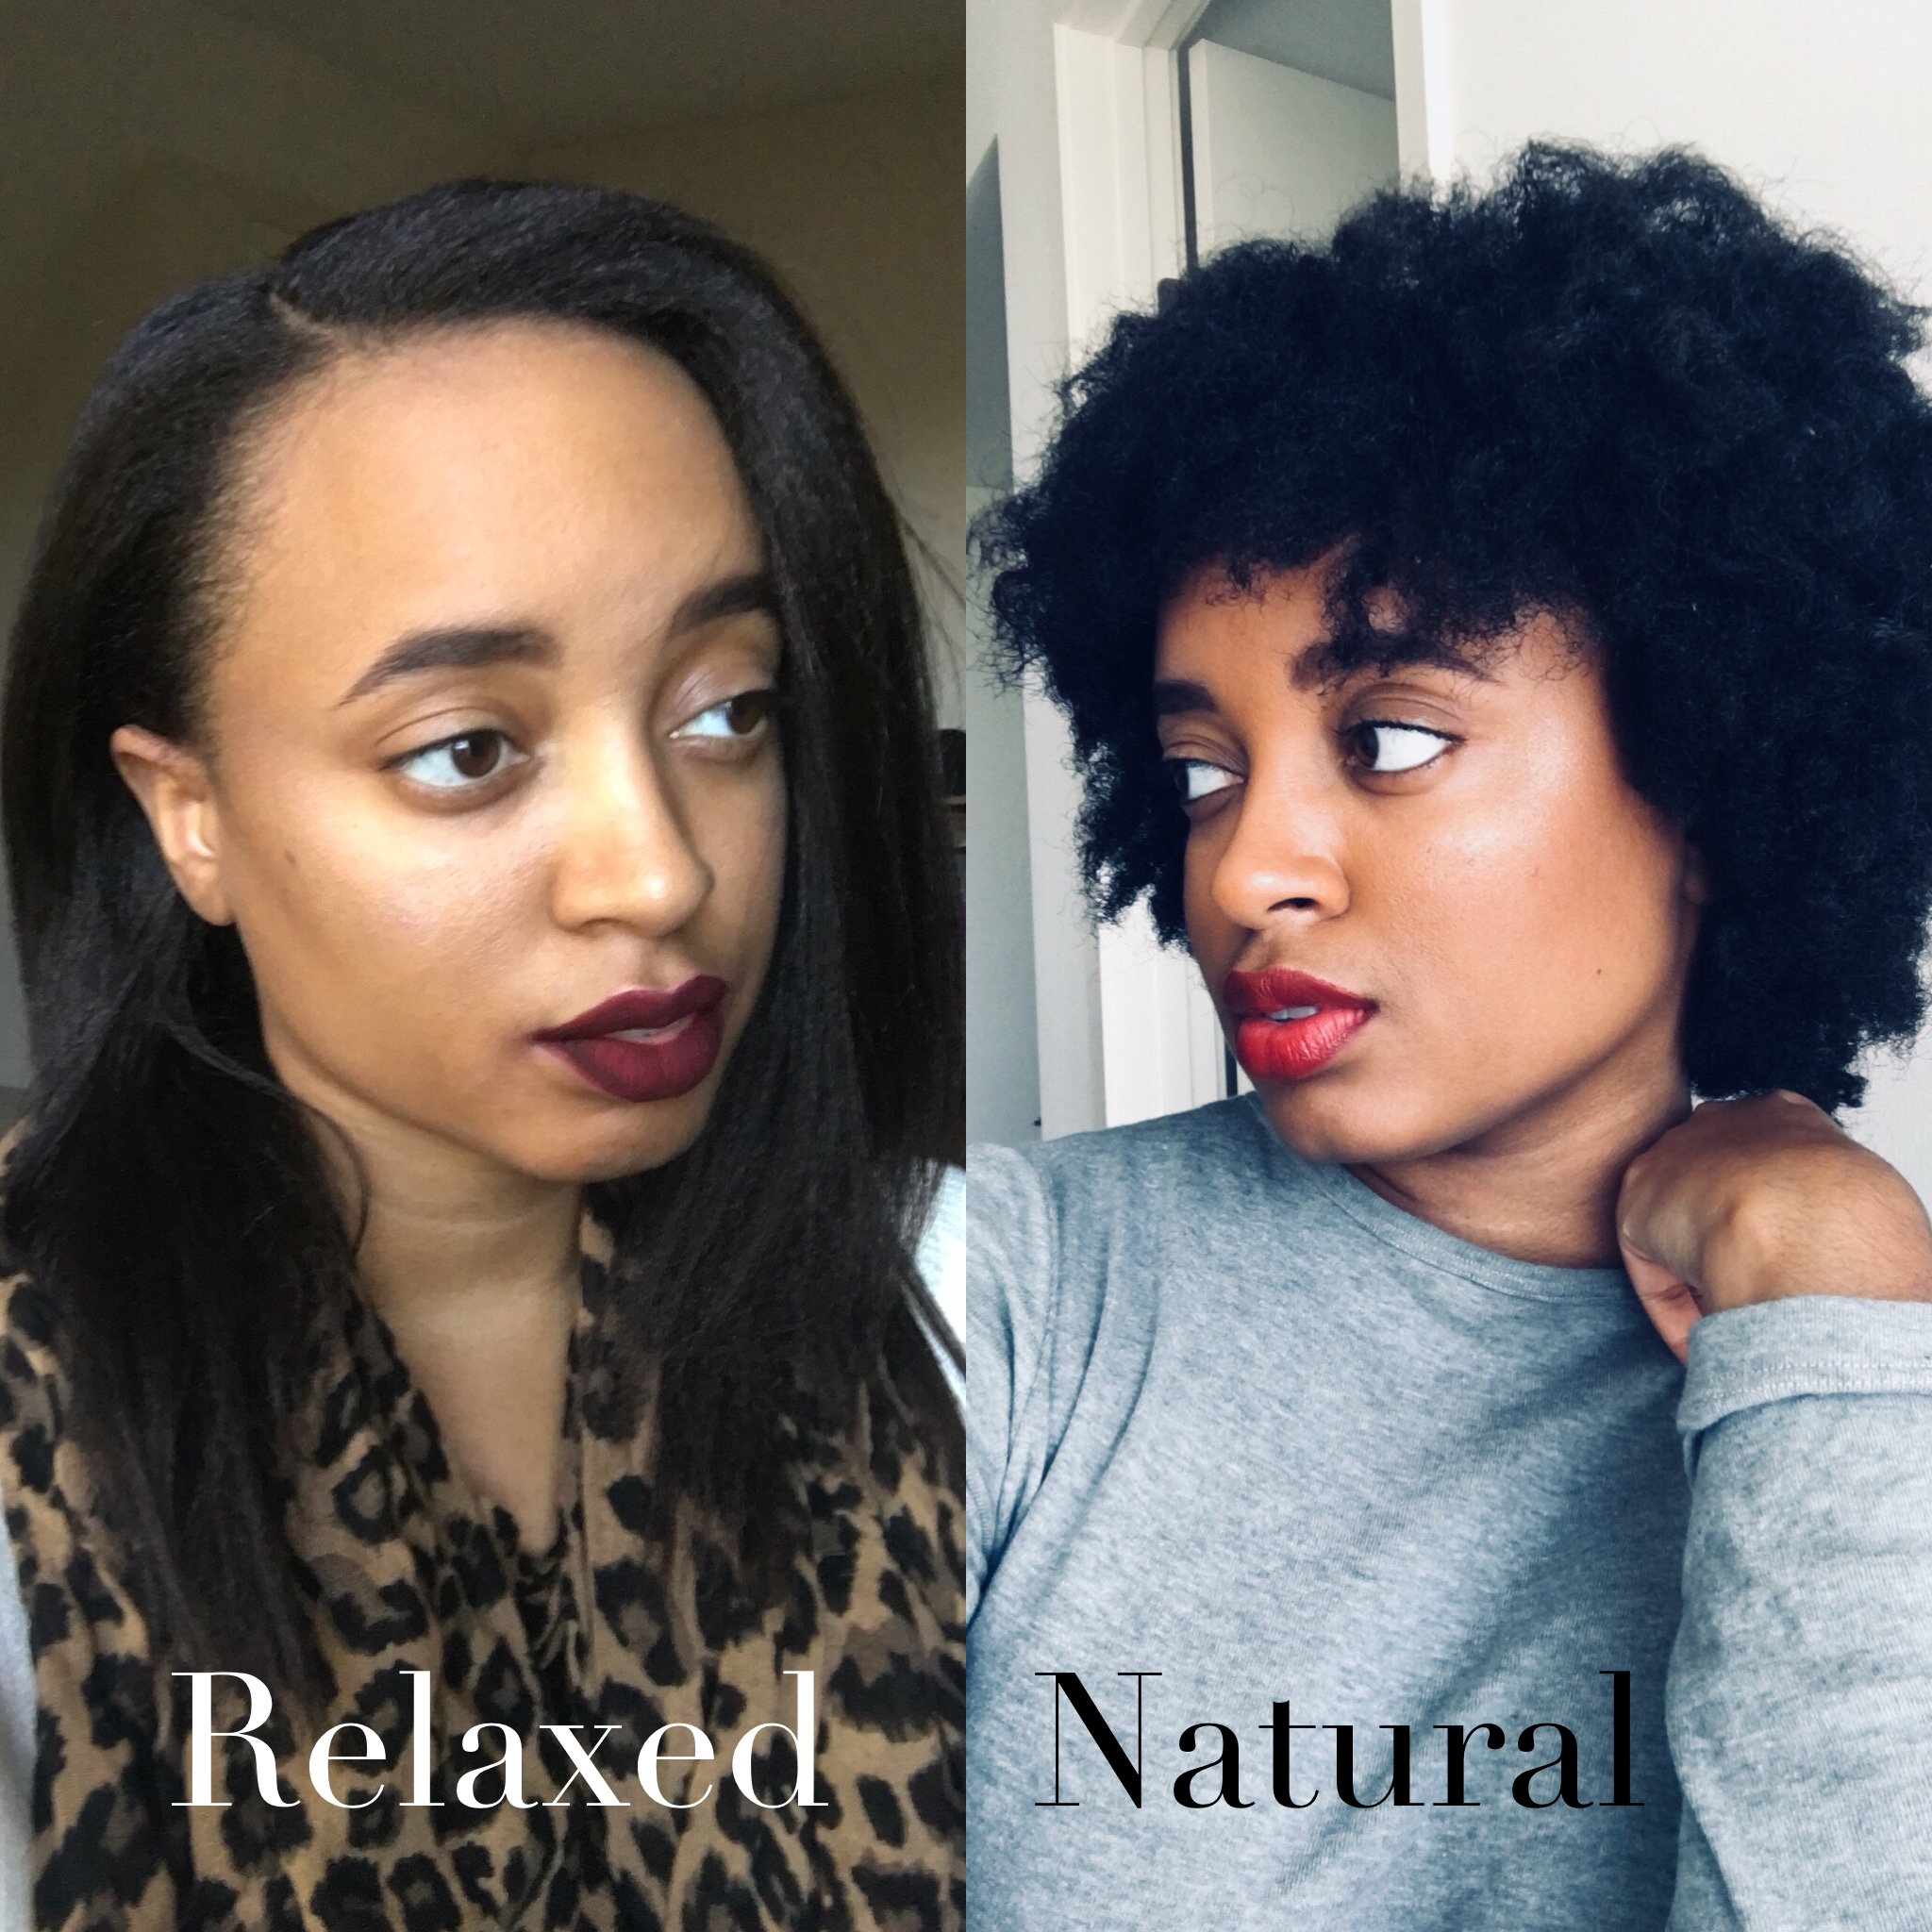 Image showing Shuna Rae with relaxed hair on left and natural hair on right.